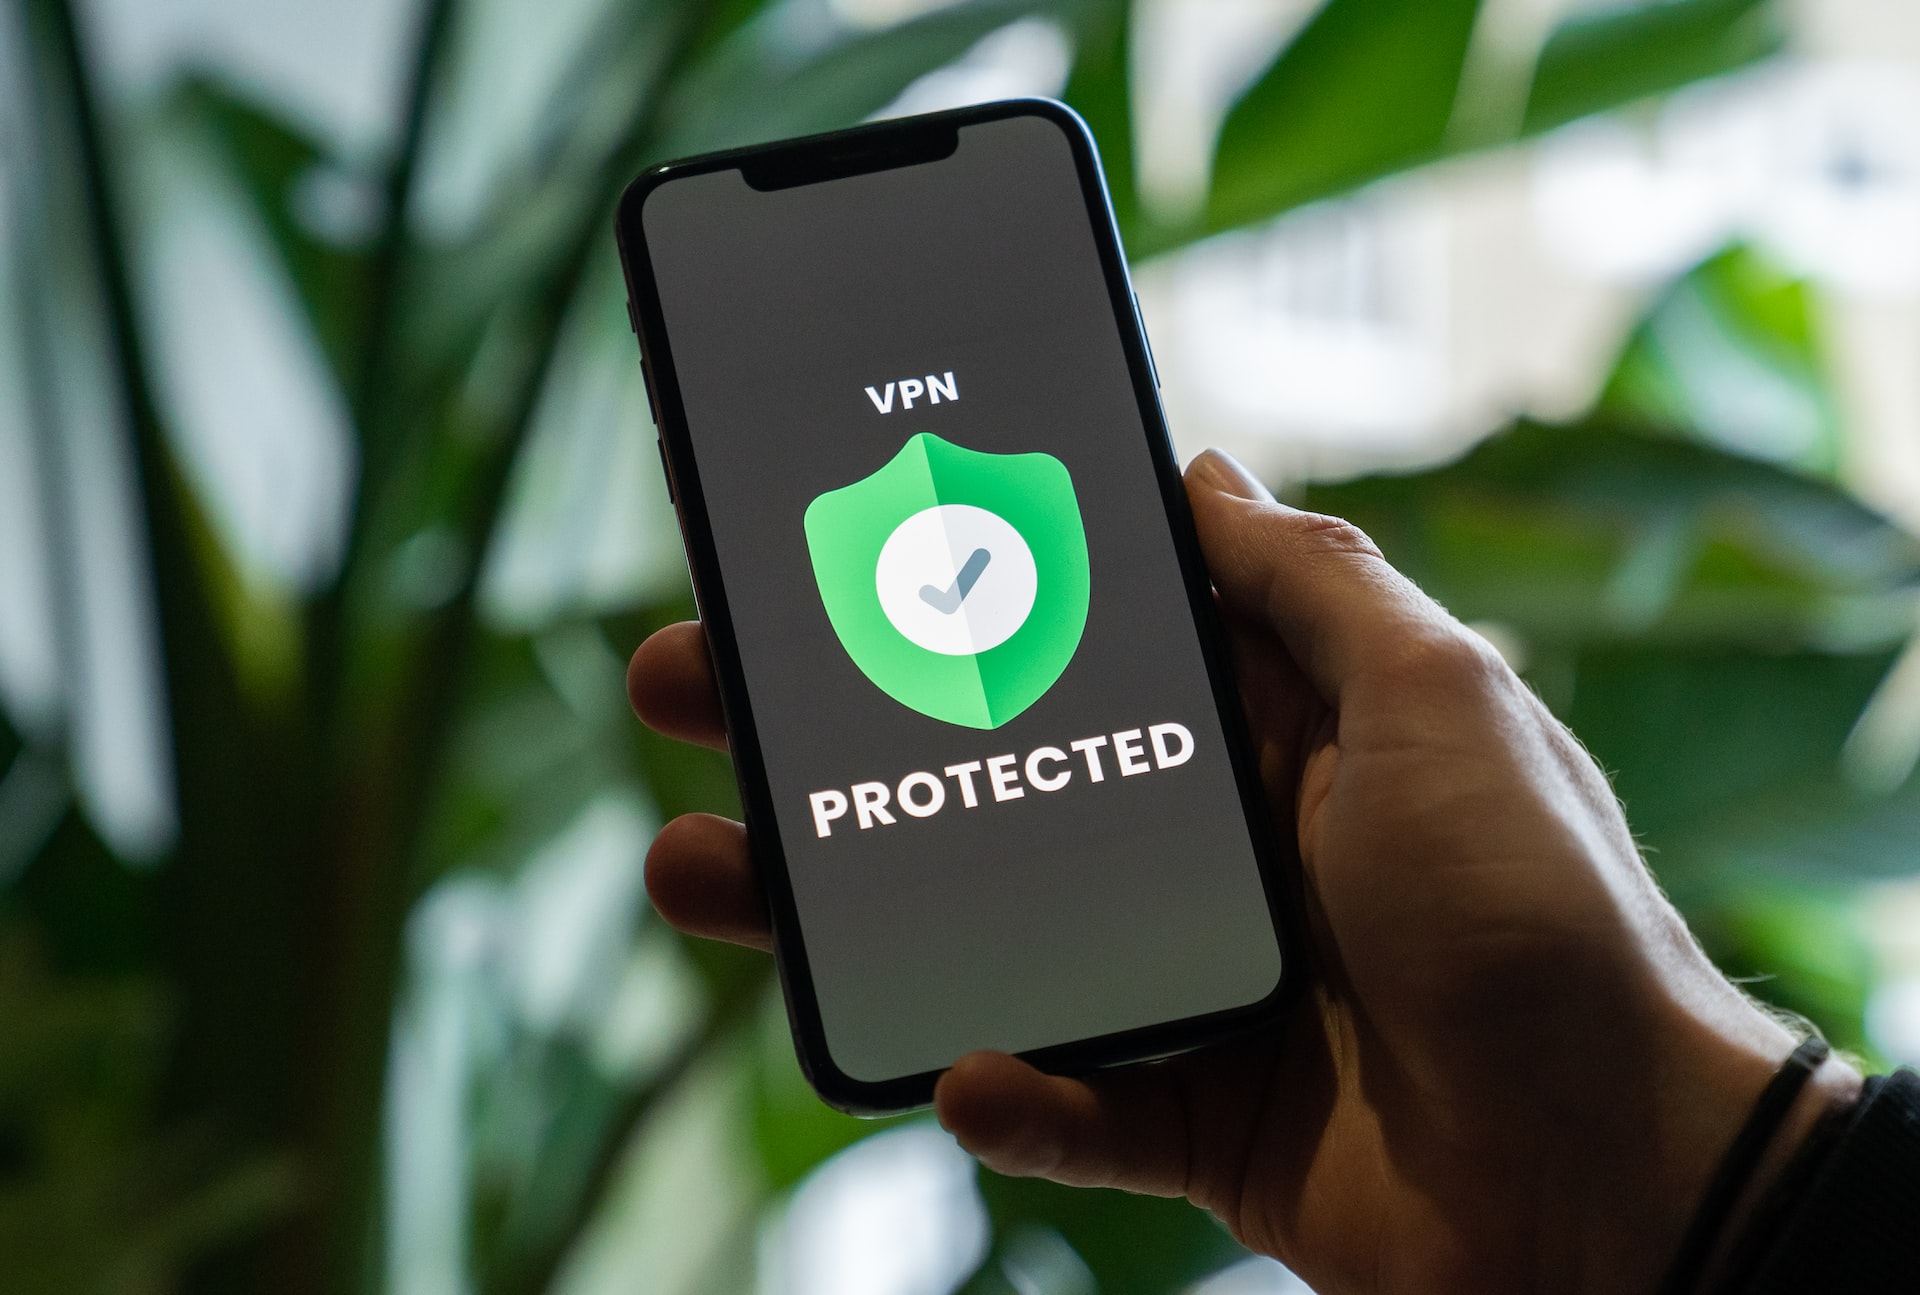 Public VPNs might not protect you as you would imagine, but hosting your own VPN is a good privacy measure.